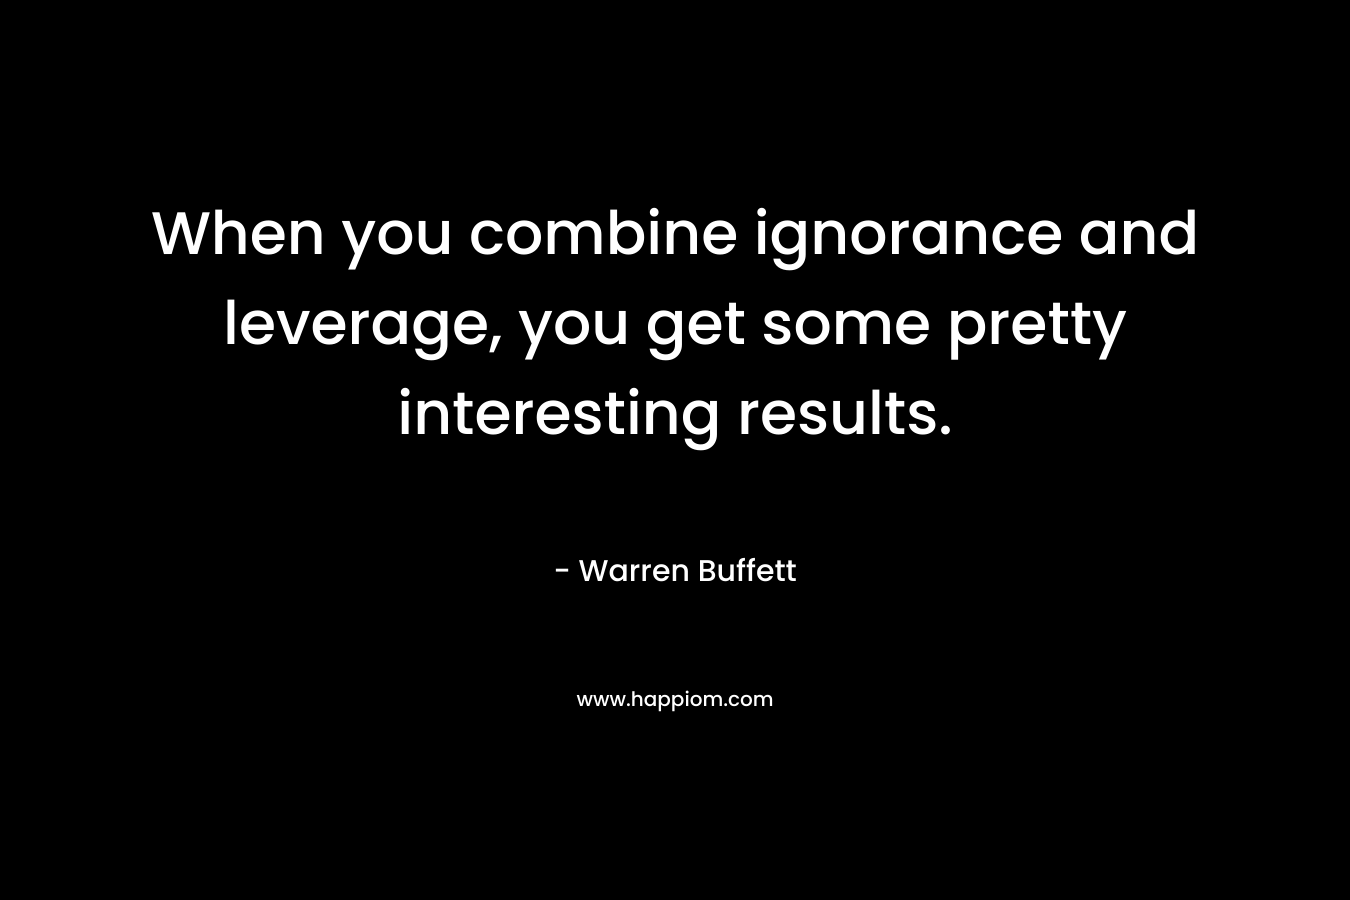 When you combine ignorance and leverage, you get some pretty interesting results. – Warren Buffett